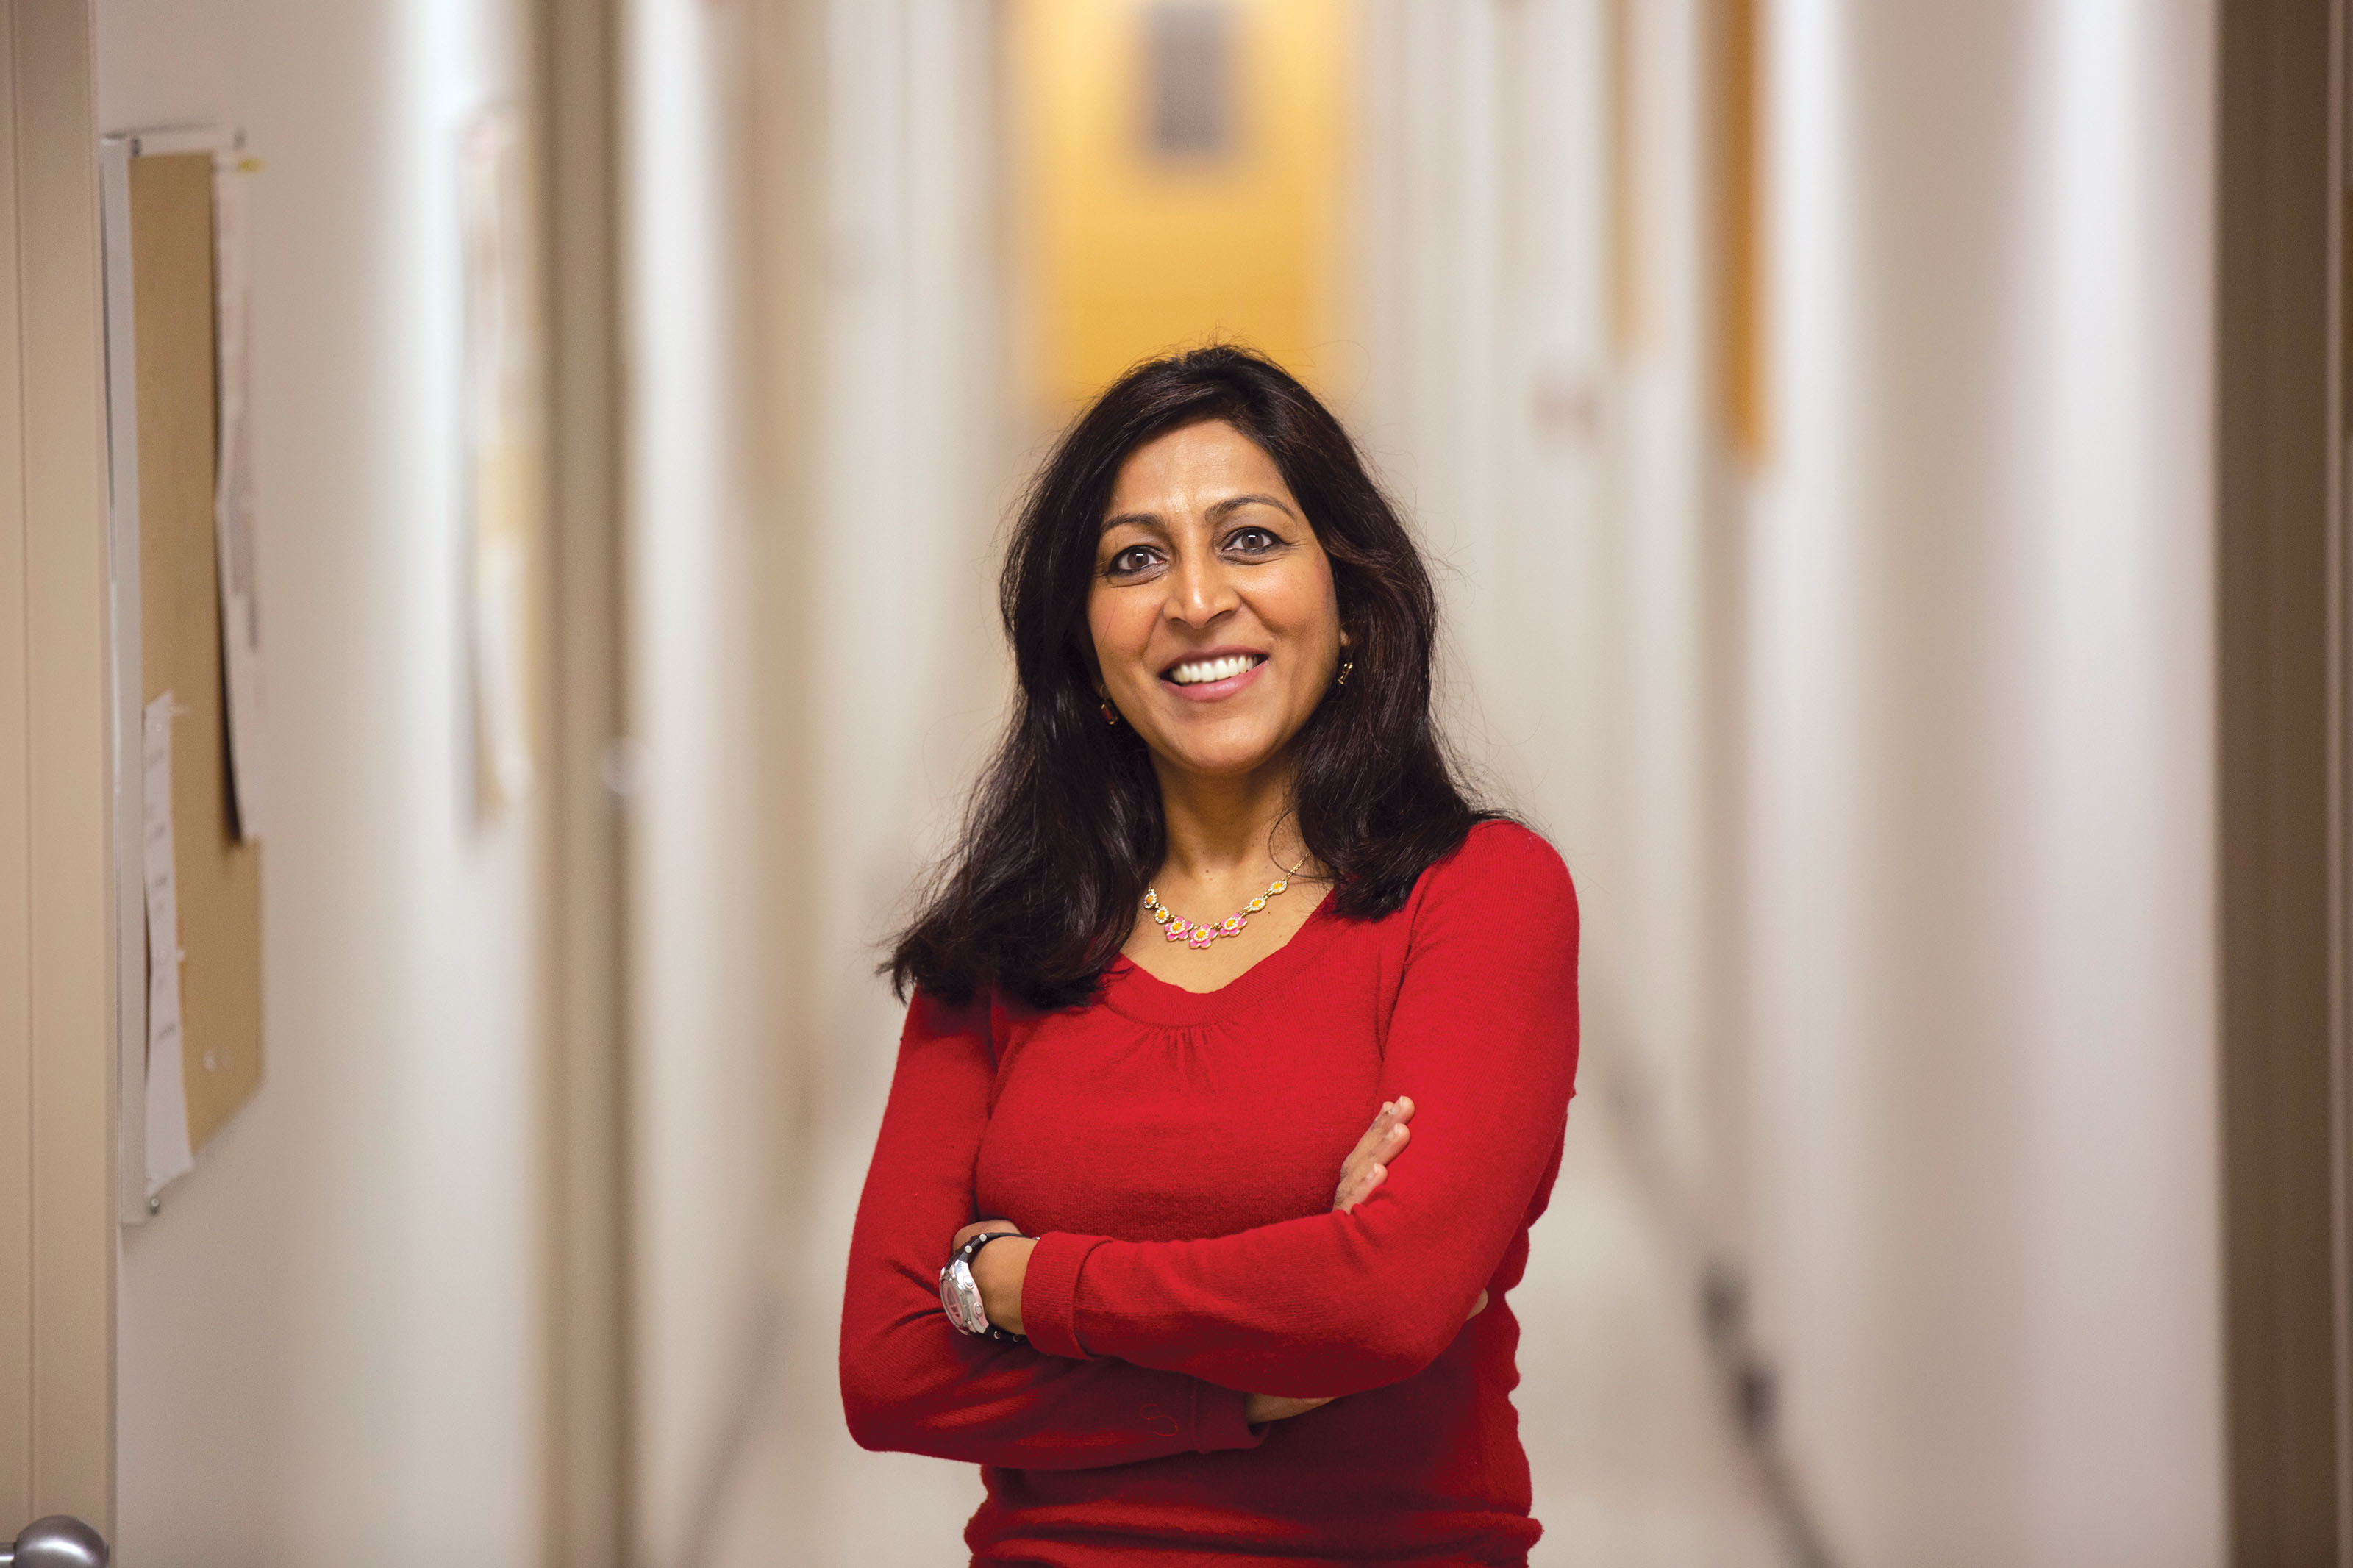 Lalitha Sankar, an associate professor of electrical engineering has been researching game theoretic models to help retailers and service providers generate accurate purchase recommendations while guaranteeing consumer privacy.